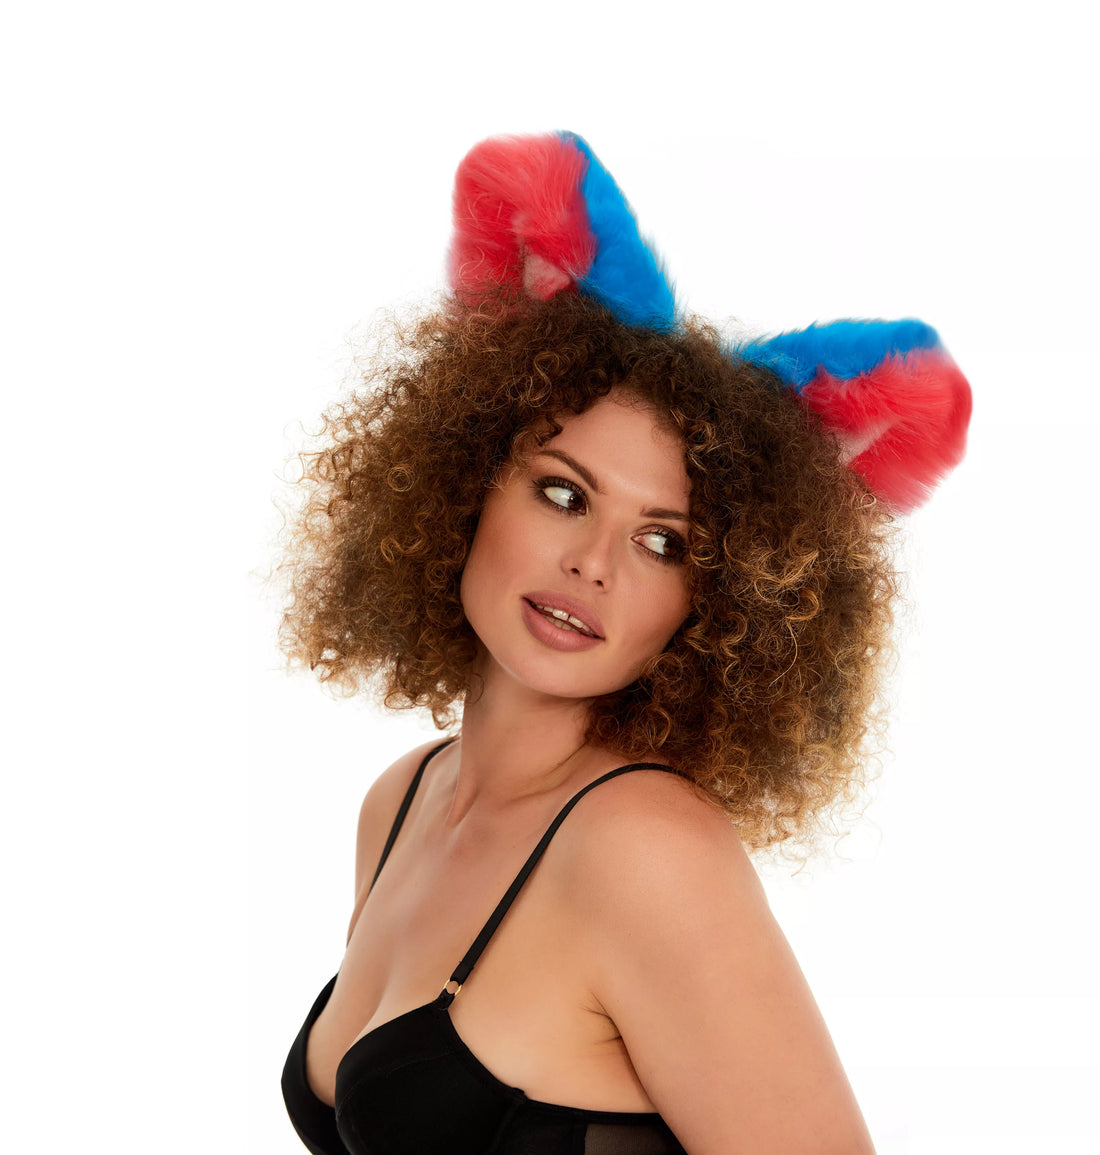 Fluffy kitsune ears bright blue with bright pink white tip